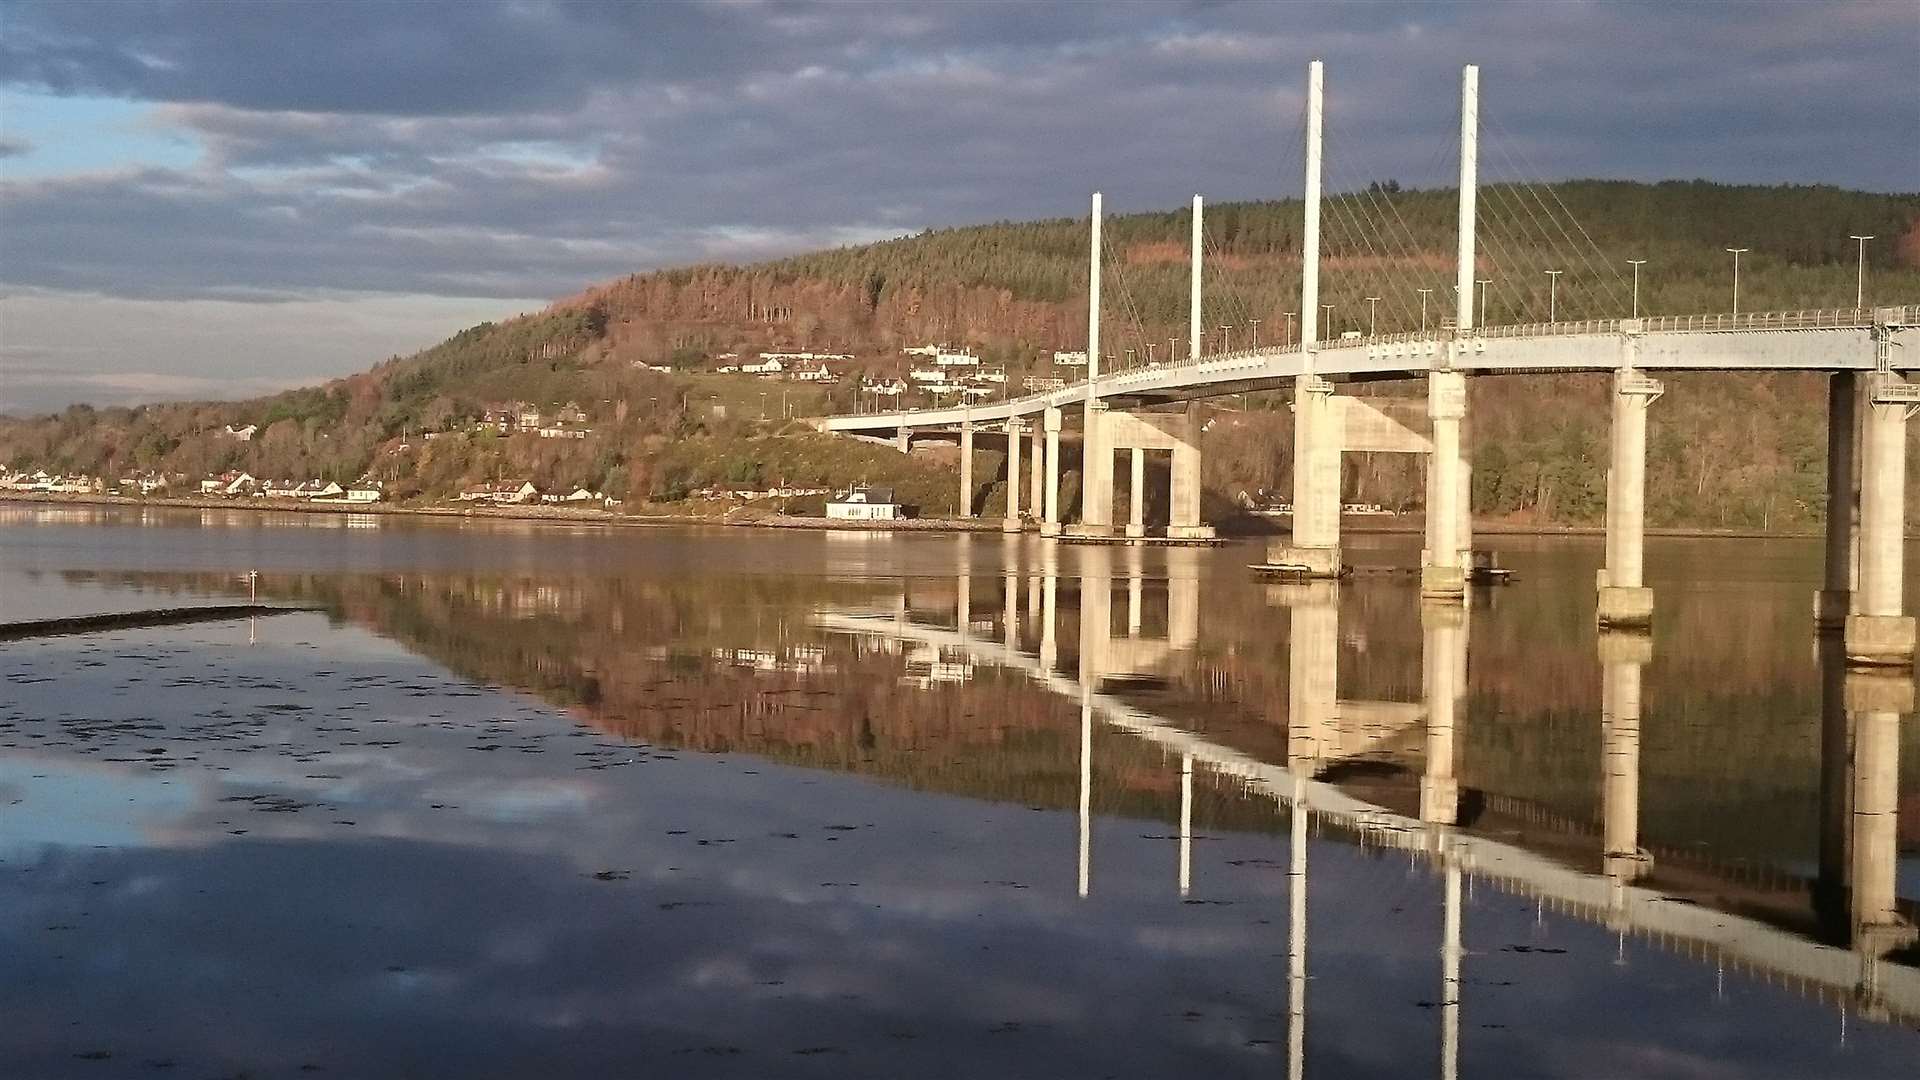 The Kessock Bridge which has lane restrictions due to the latest Met Office weather warning.